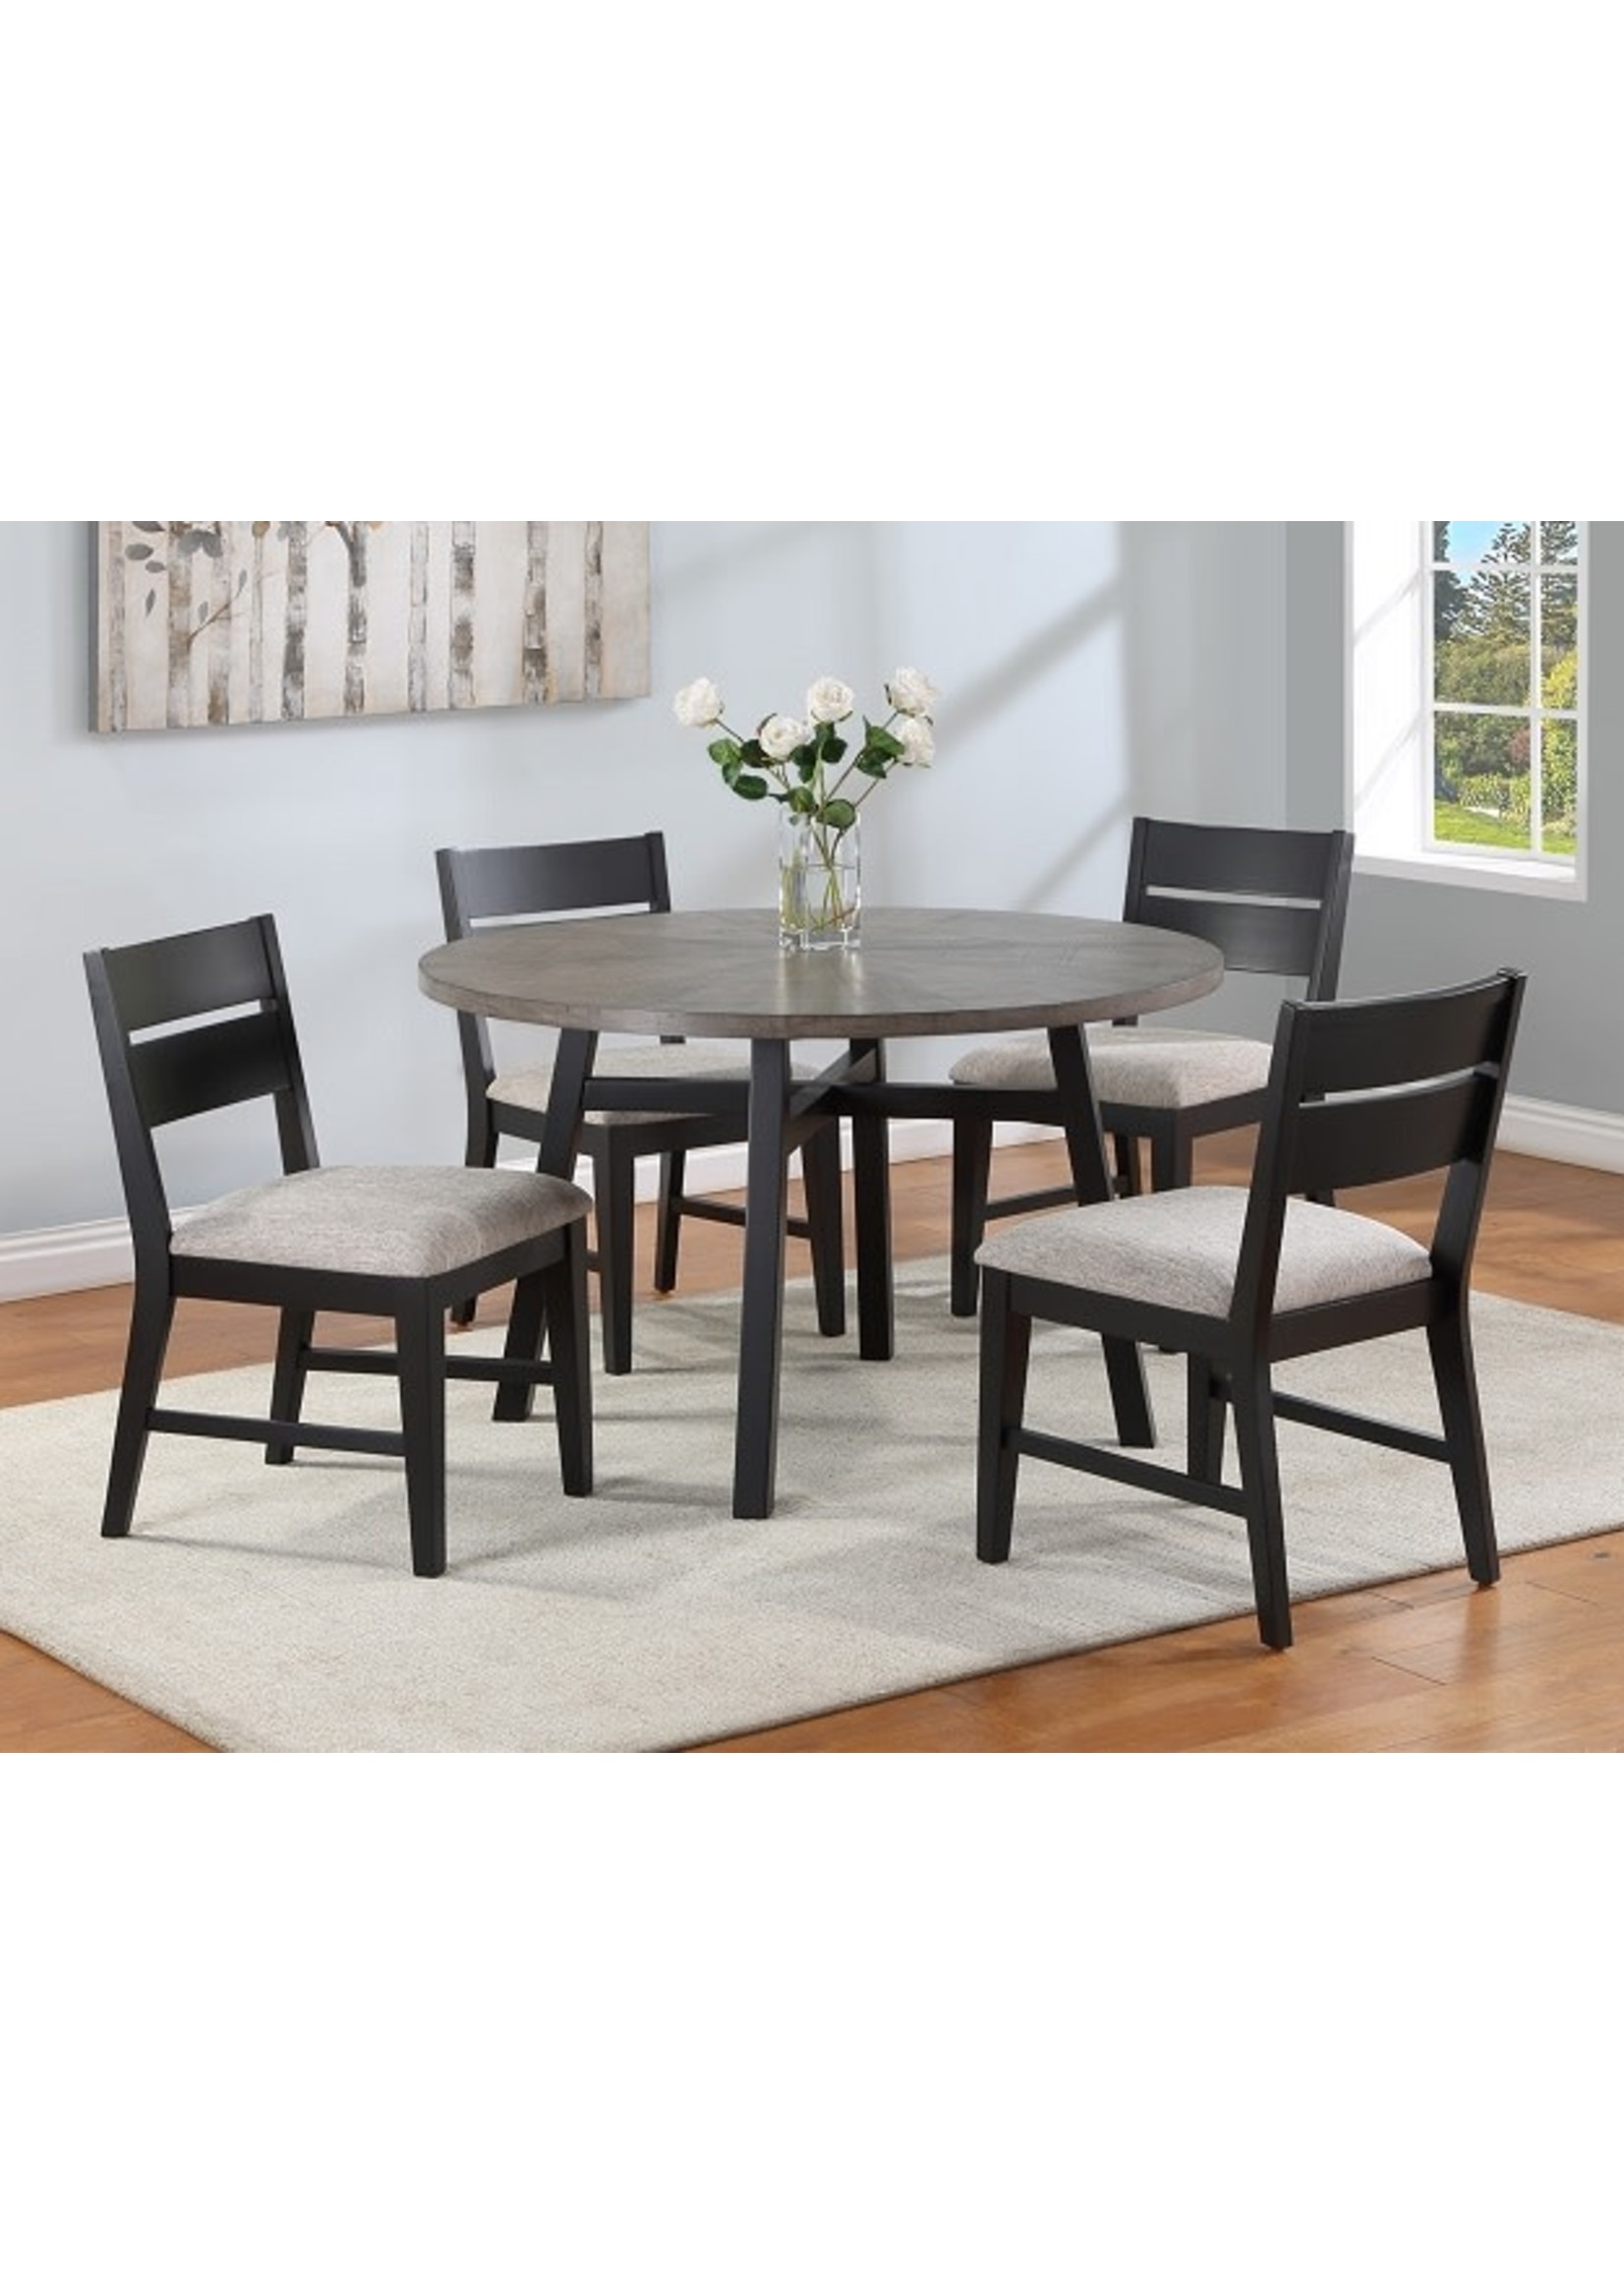 CROWNMARK 2212T-5P MATHIS DINING GROUP